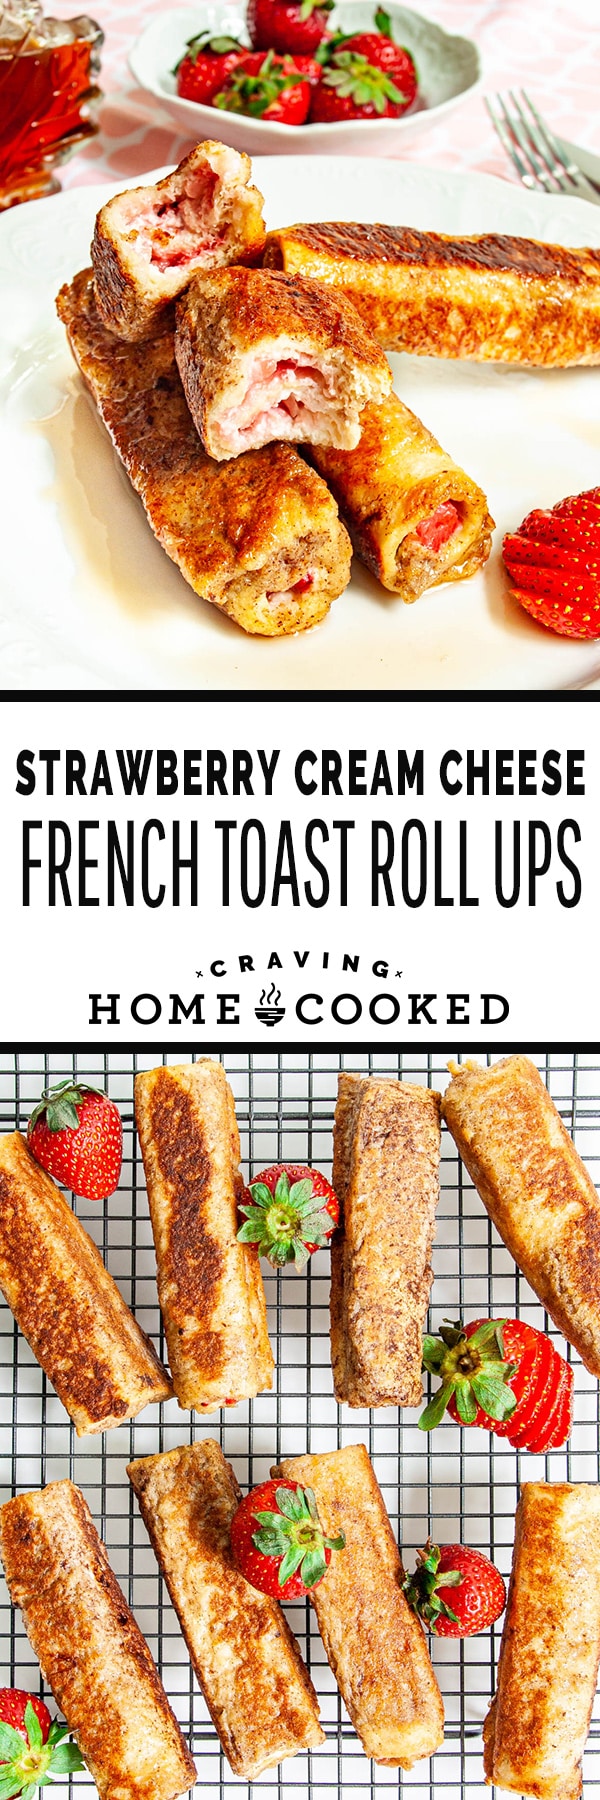 Strawberry cream cheese french toast roll ups